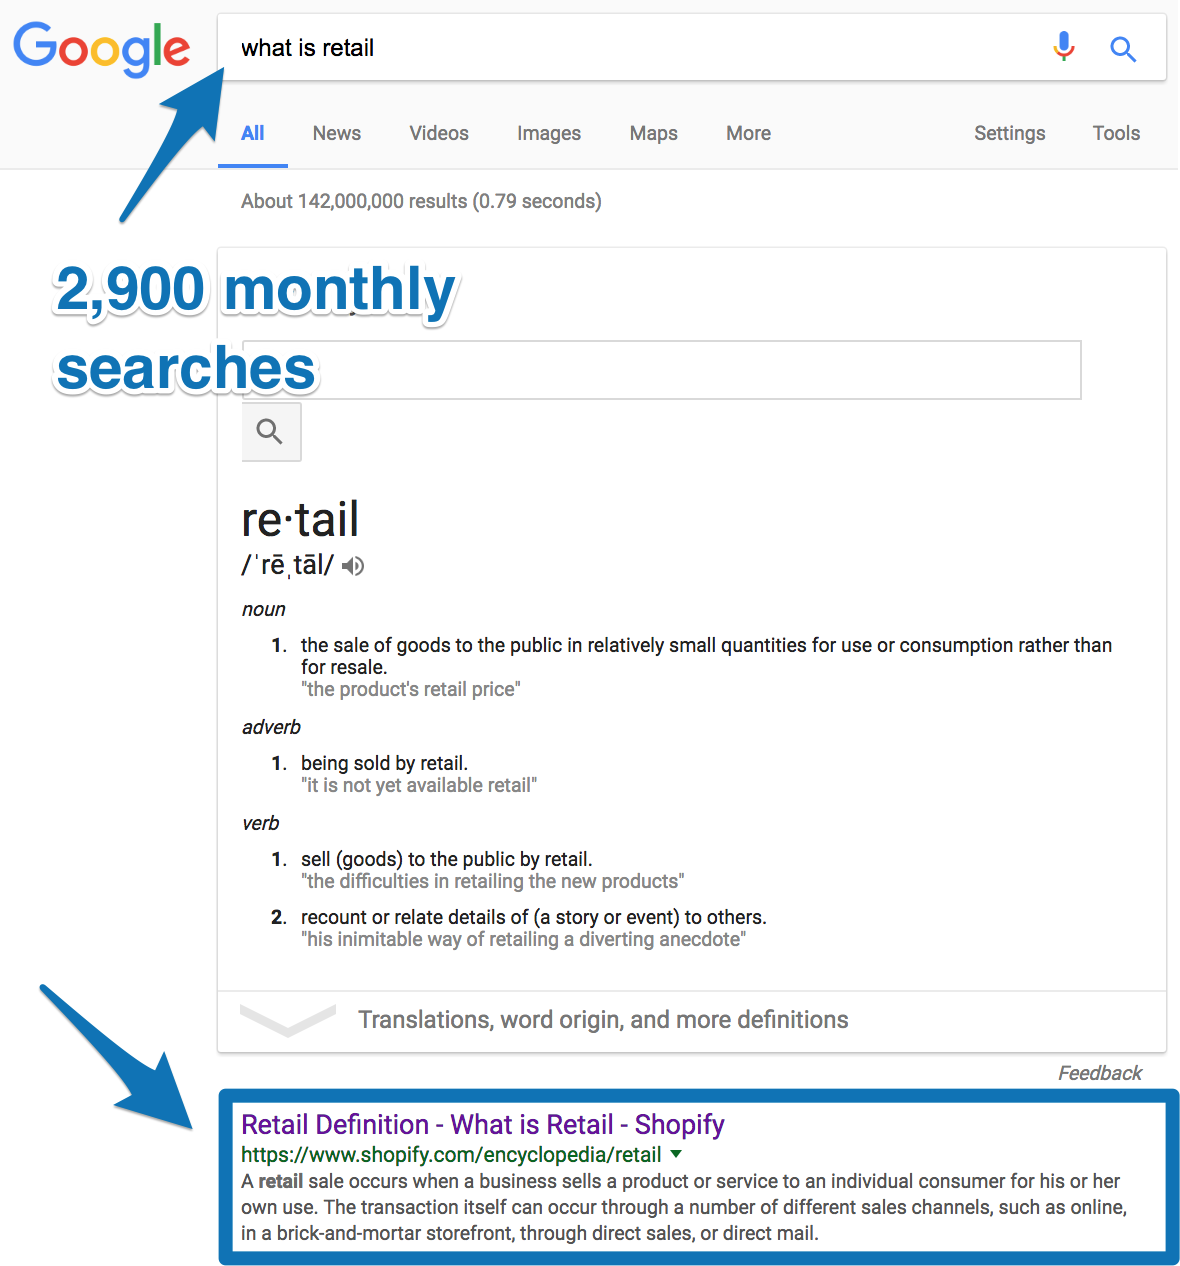 Screenshot showing a shopify result for the google search term "what is retail"